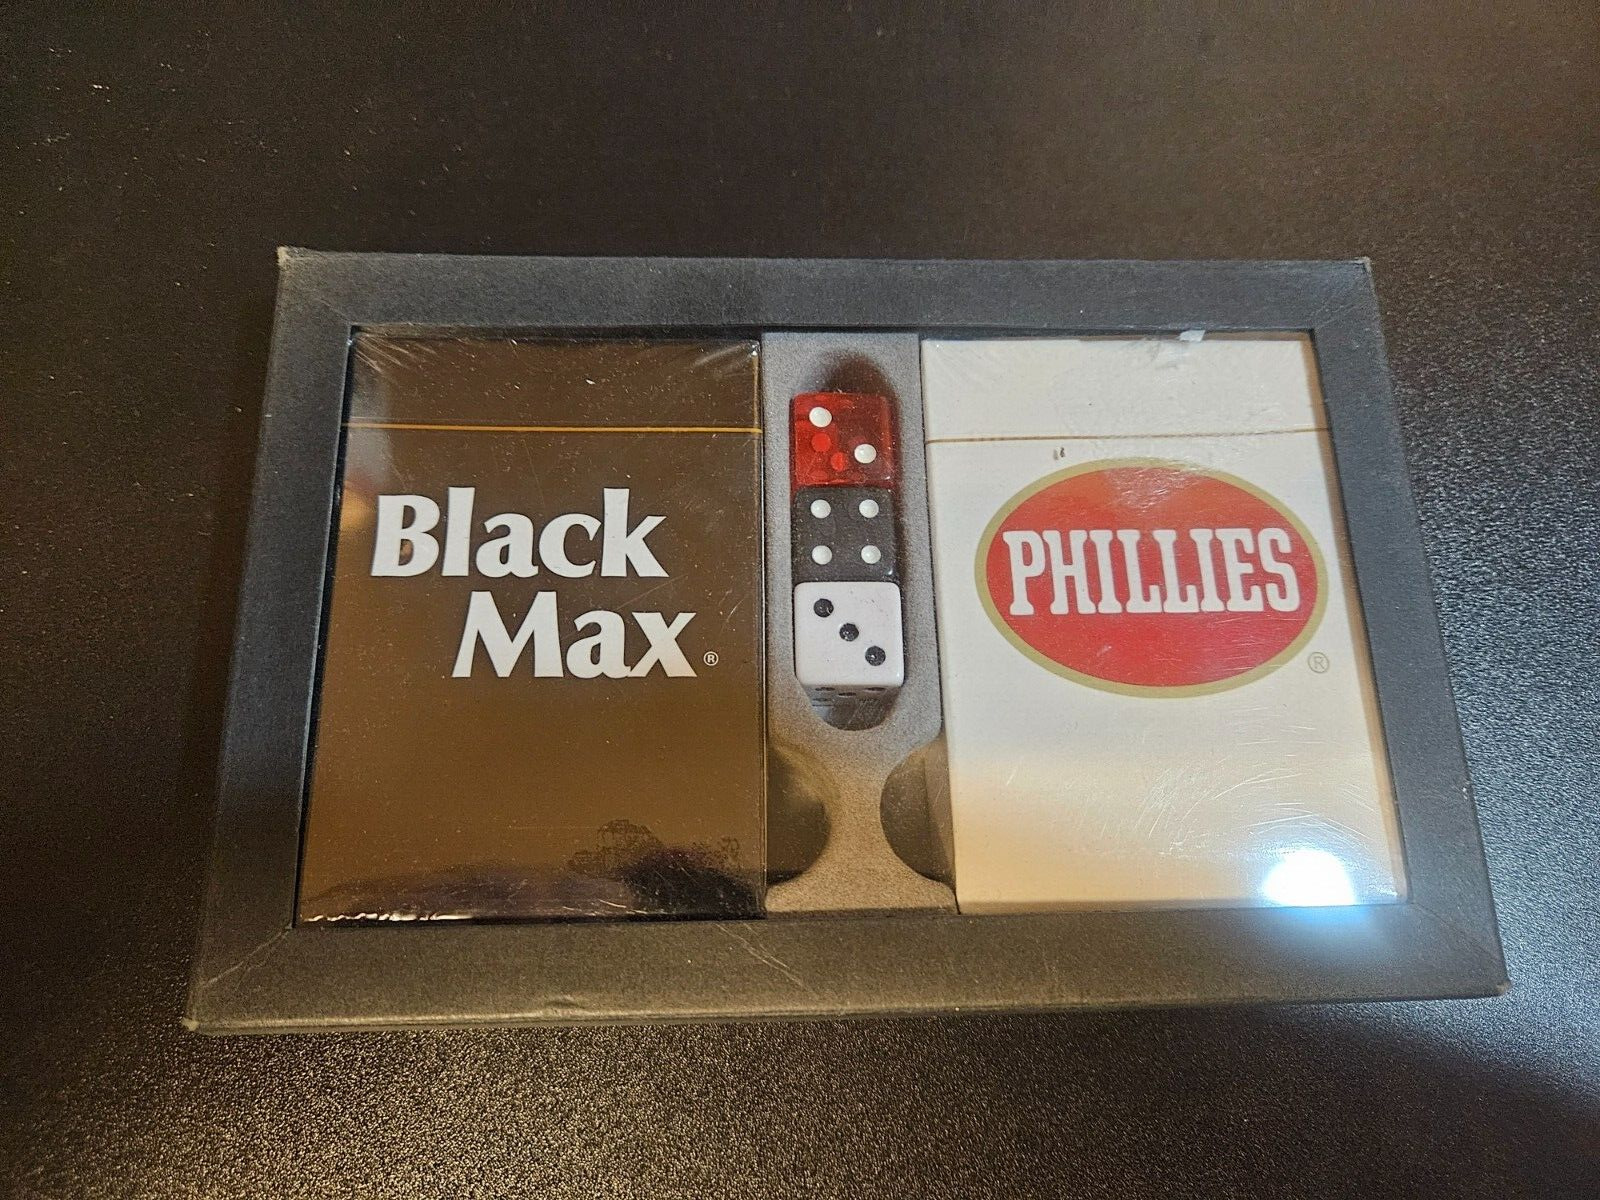 BLACK MAX/PHILLIES - Card and Dice Set - 2 Decks of /Cards and 3 Dice - New